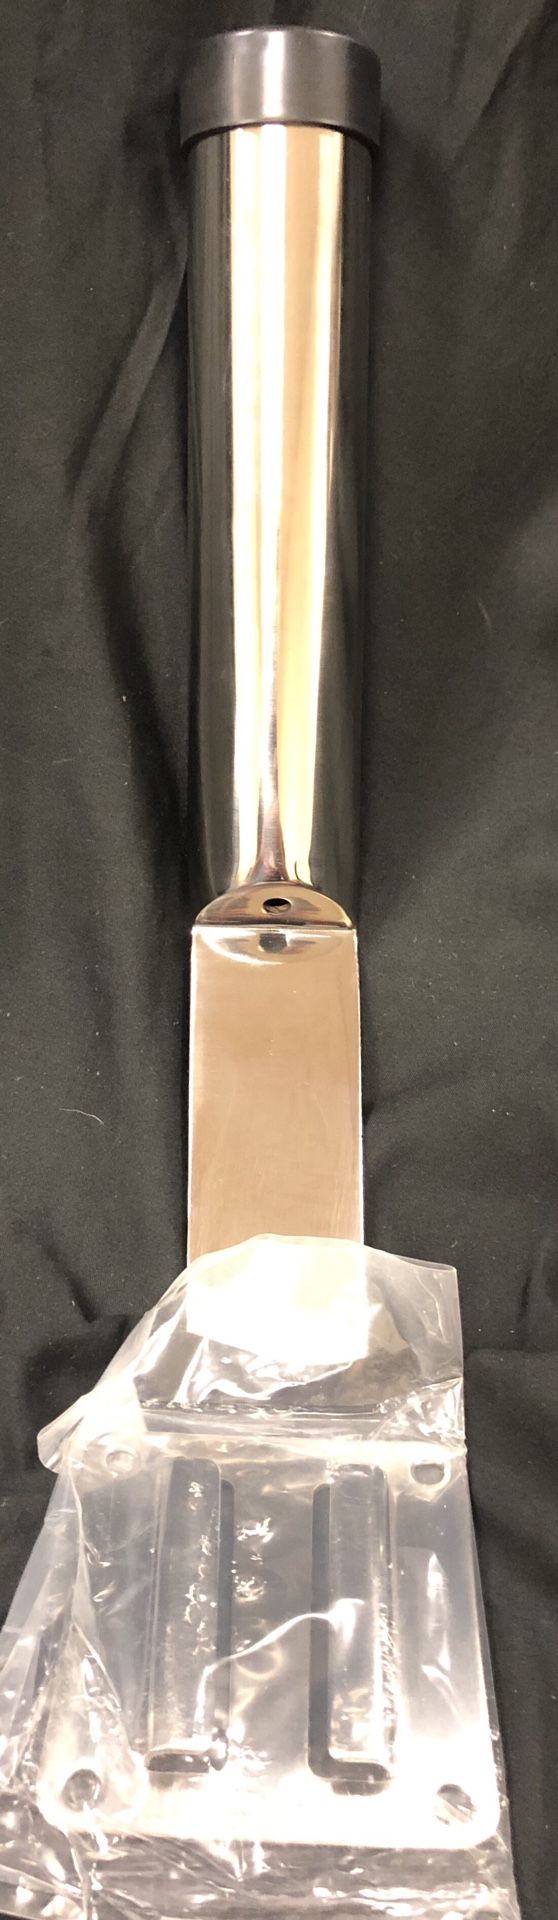 Amarine Made Stainless Steel Slide Mount Removable Fishing Rod Holder - Brand New